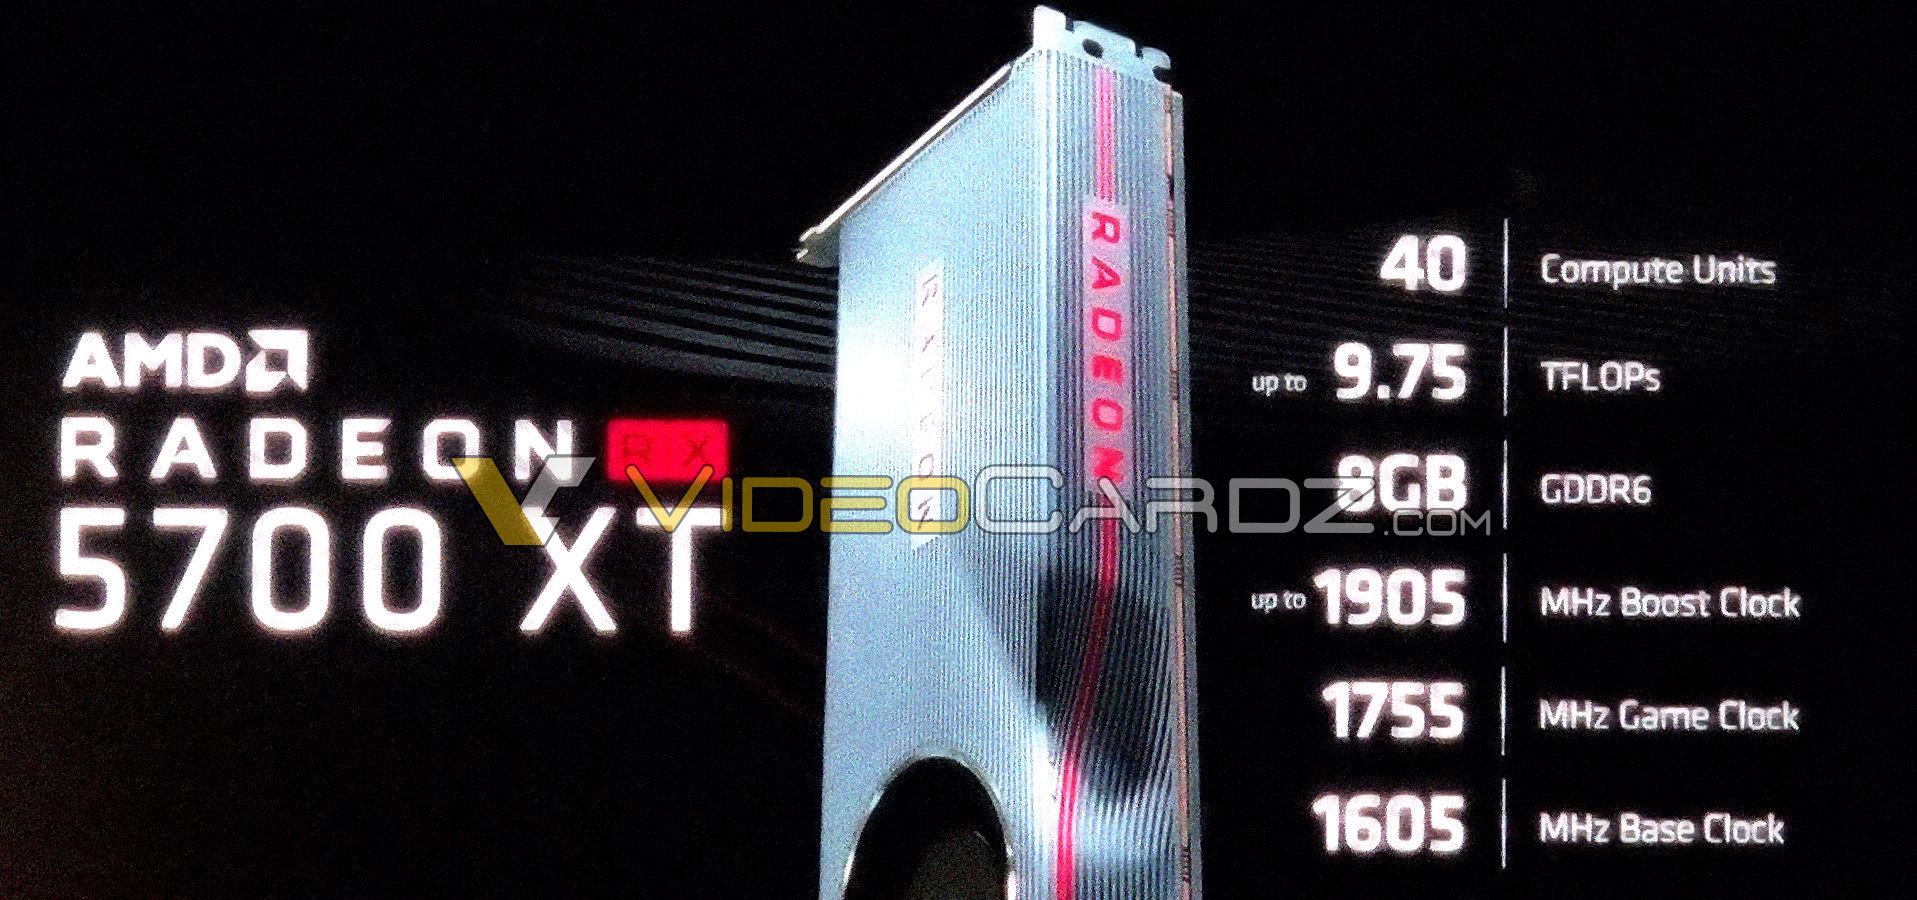 Media asset in full size related to 3dfxzone.it news item entitled as follows: Una slide leaked anticipa le specifiche della card AMD Navi Radeon RX 5700 XT | Image Name: news29671_AMD-Radeon-RX-5700-XT_1.jpg